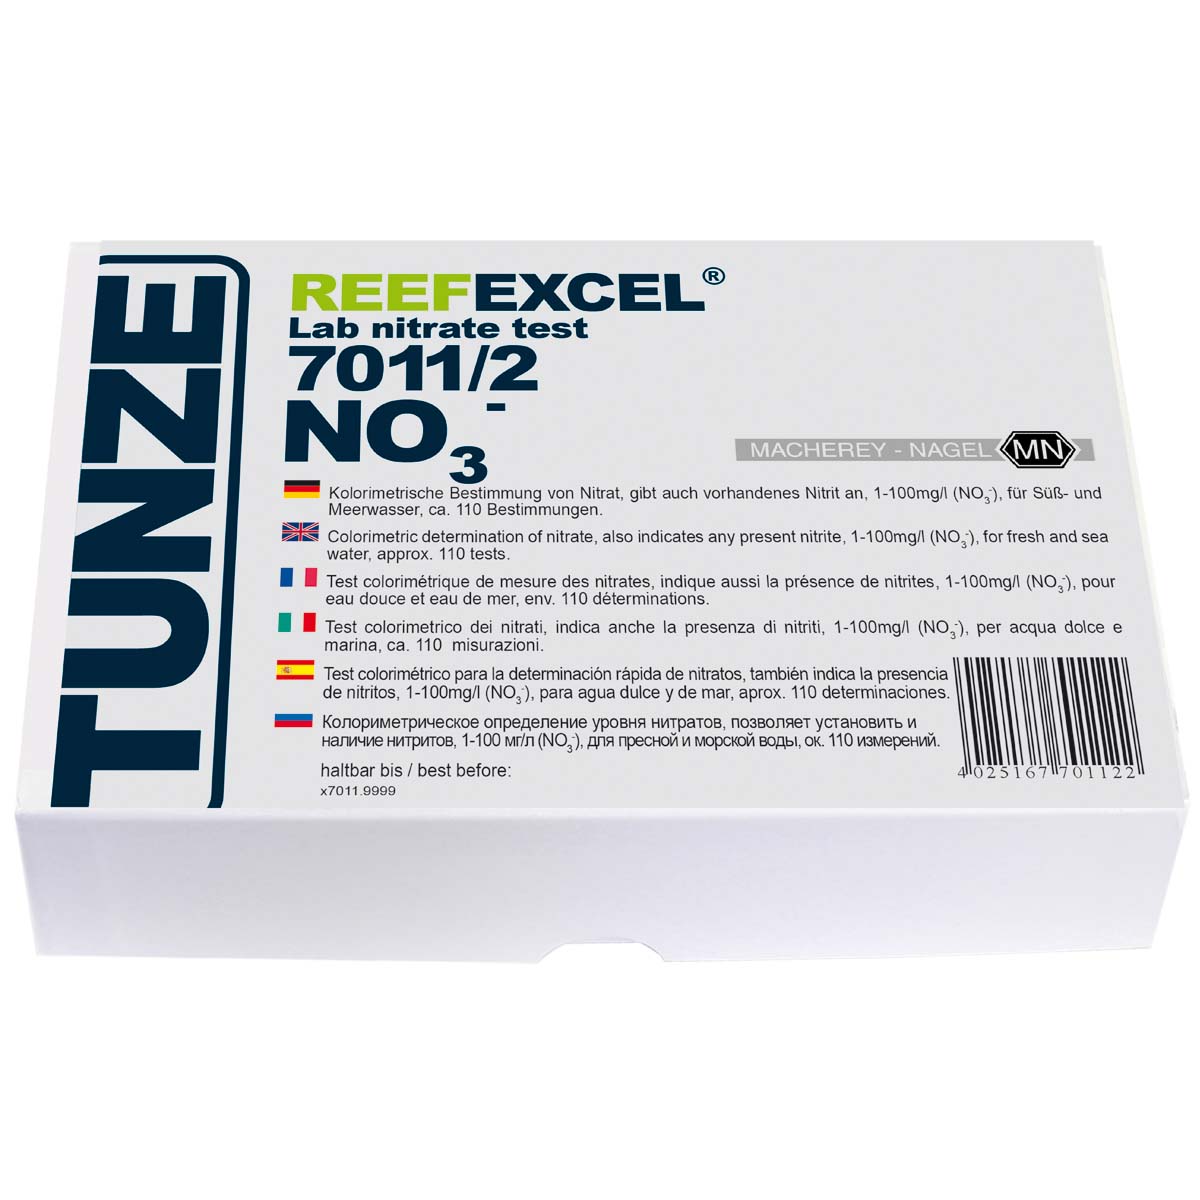 Reef Excel® Lab nitrate test - Tunze